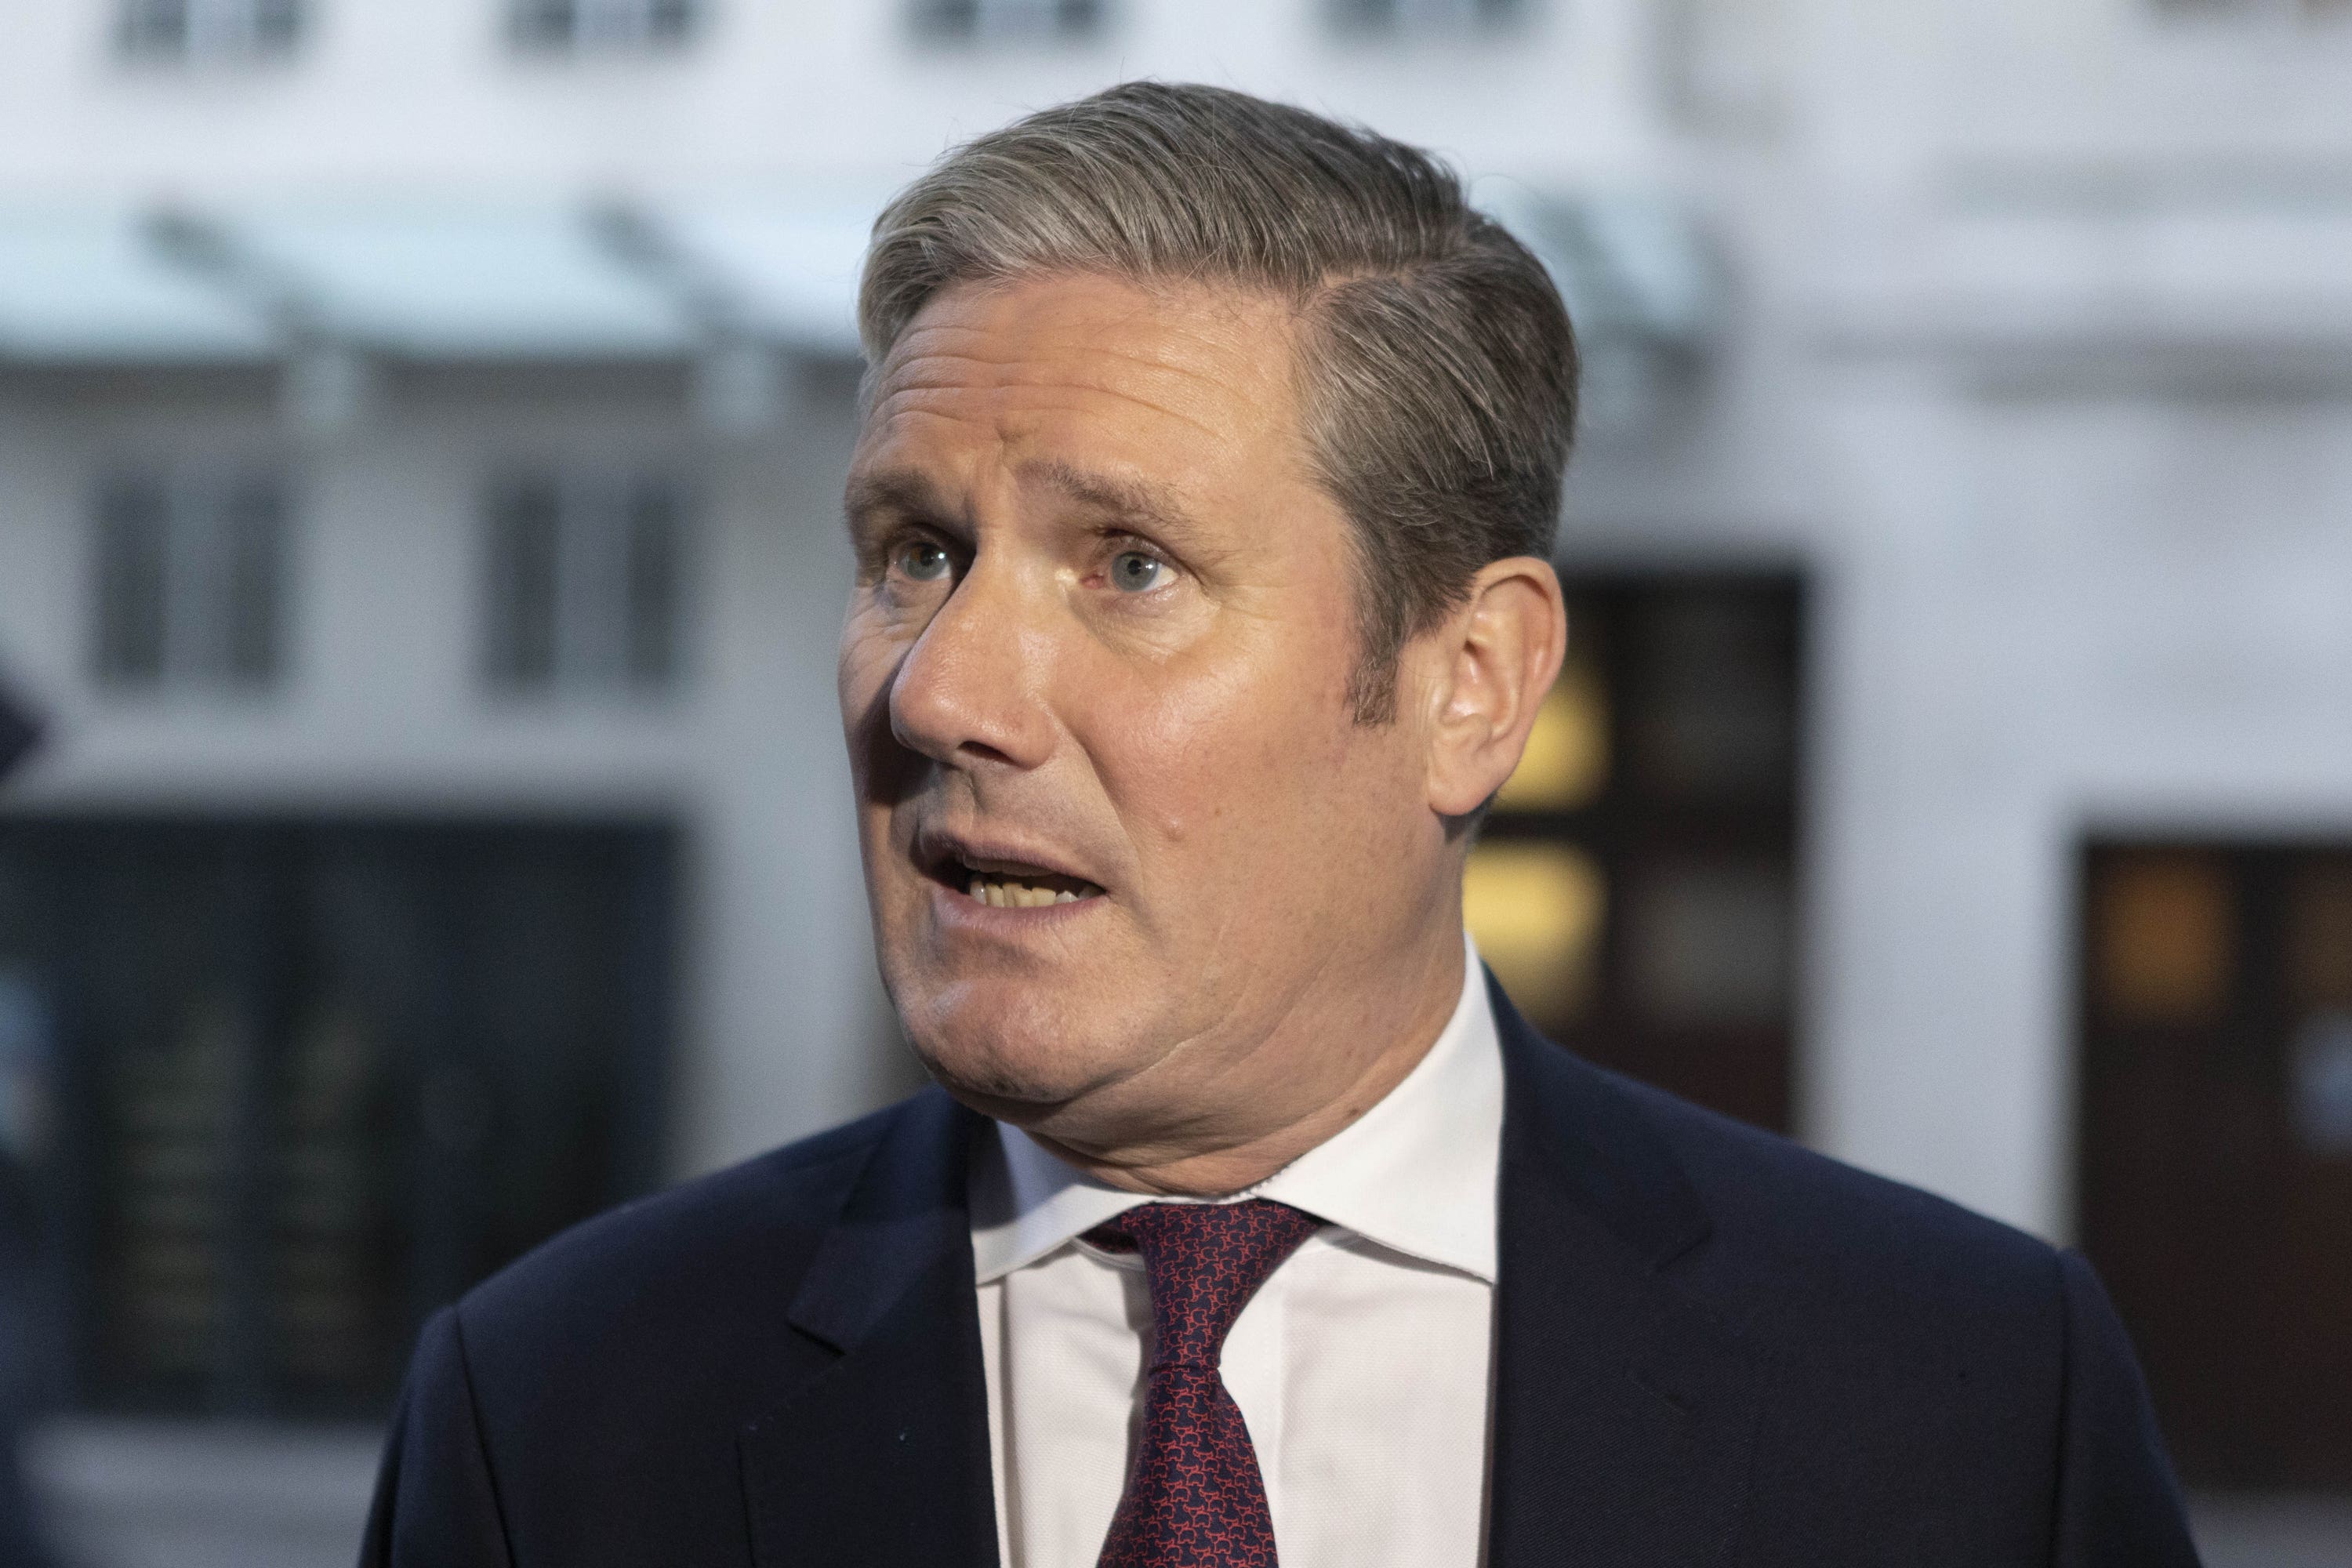 Labour leader Sir Keir Starmer has ruled out backing a Scottish independence referendum (Belinda Jiao/PA)